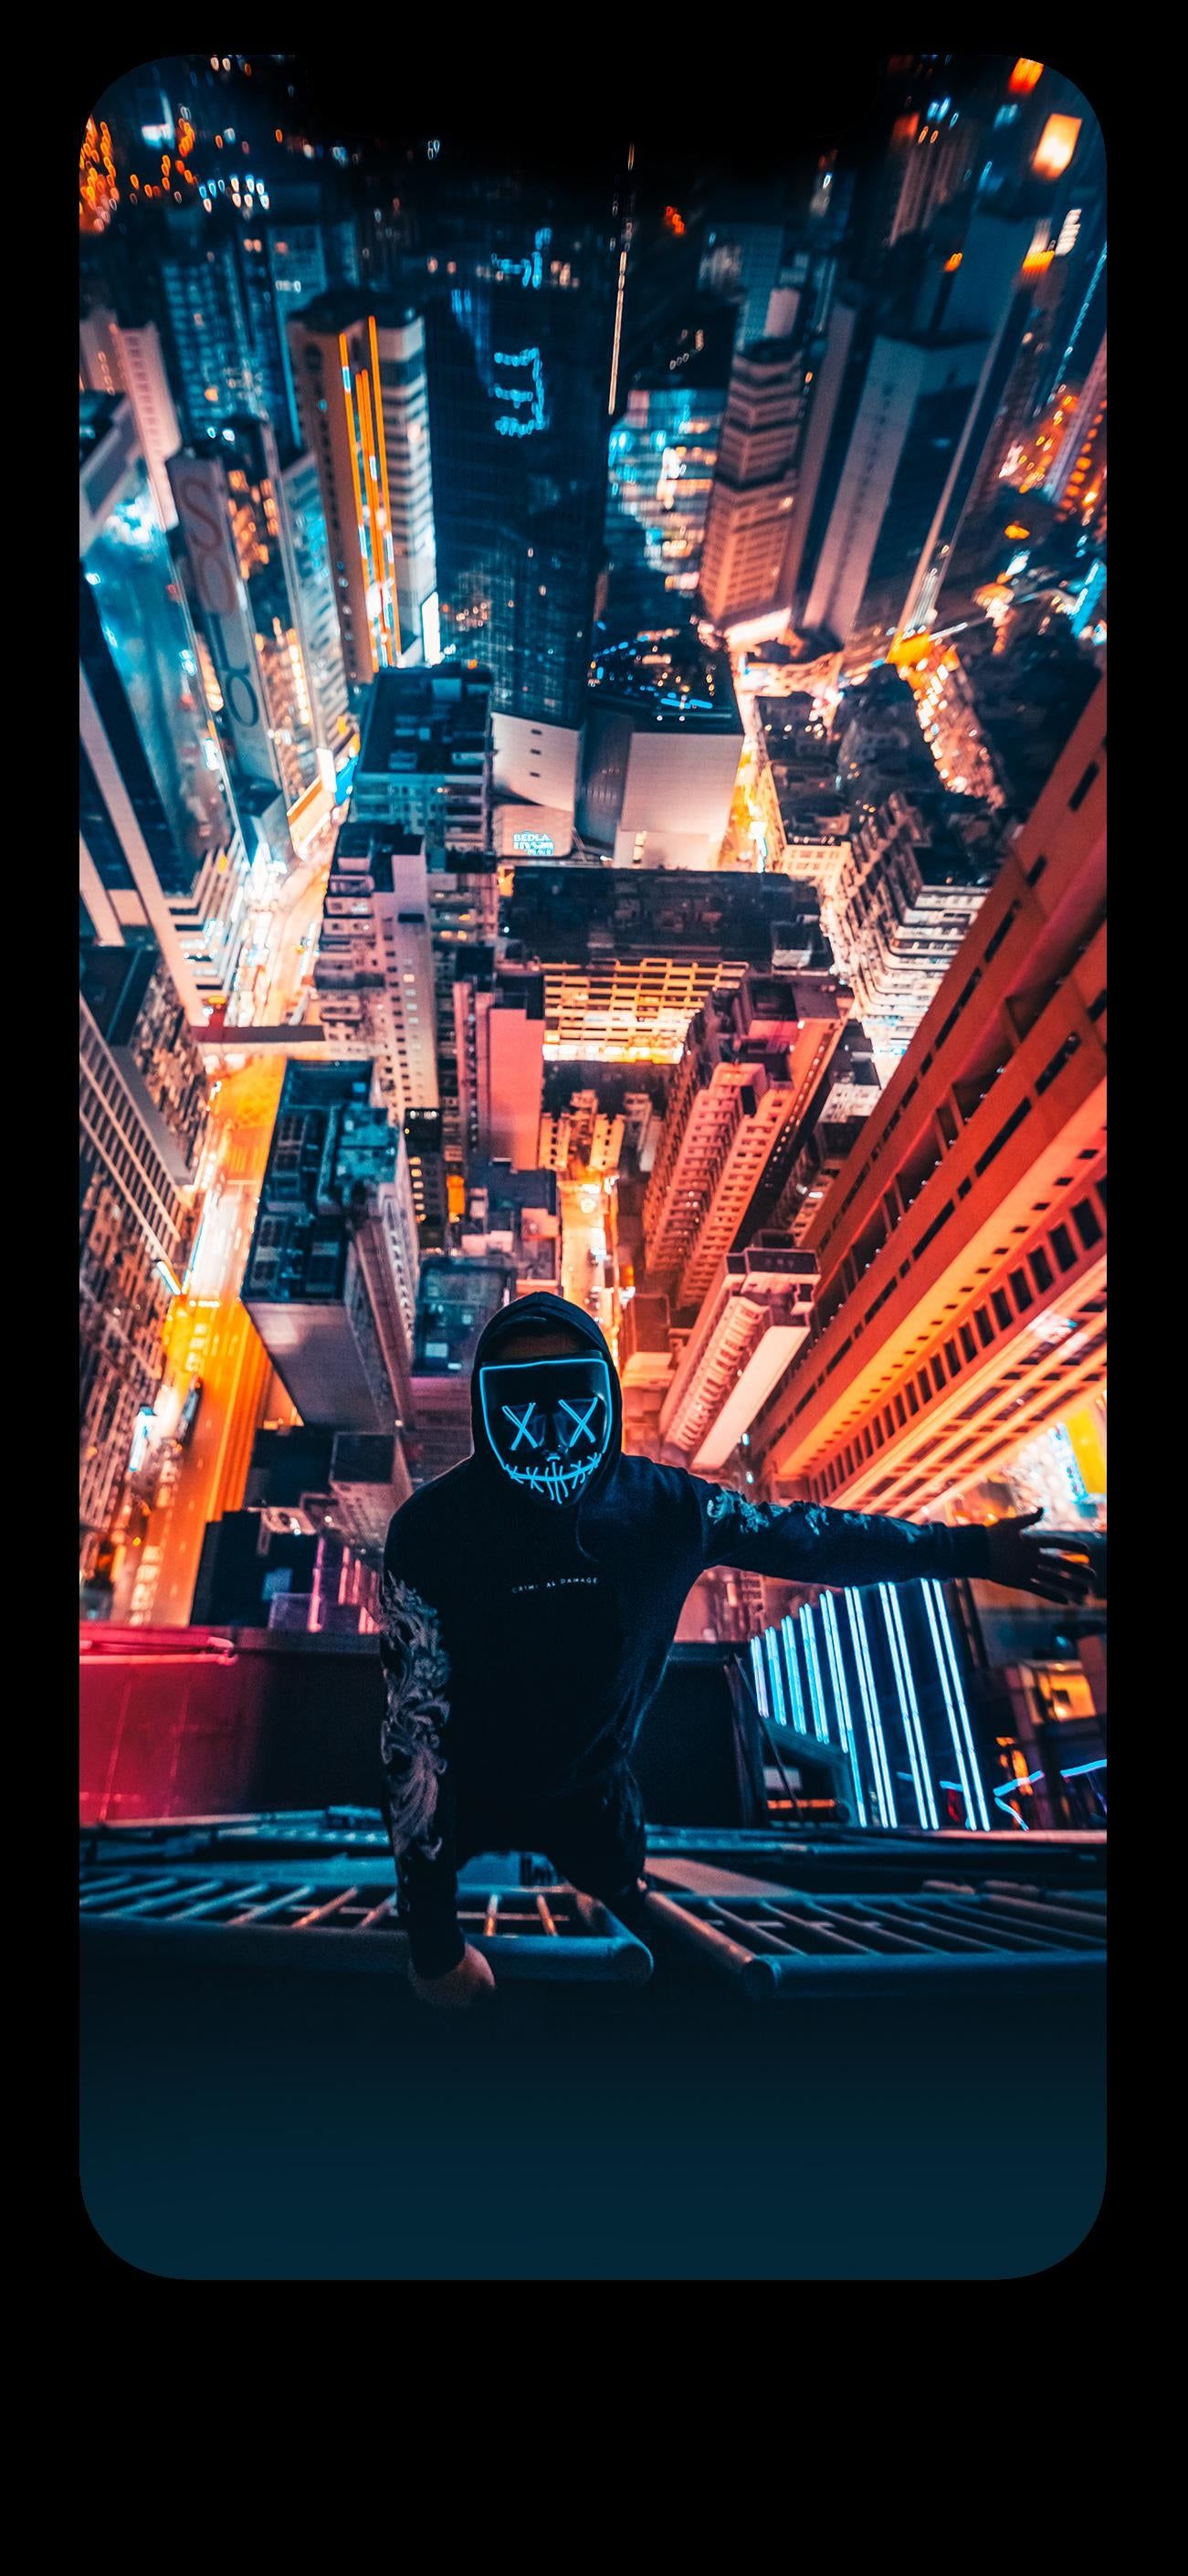 Wallpaper to hide the iPhone X notch